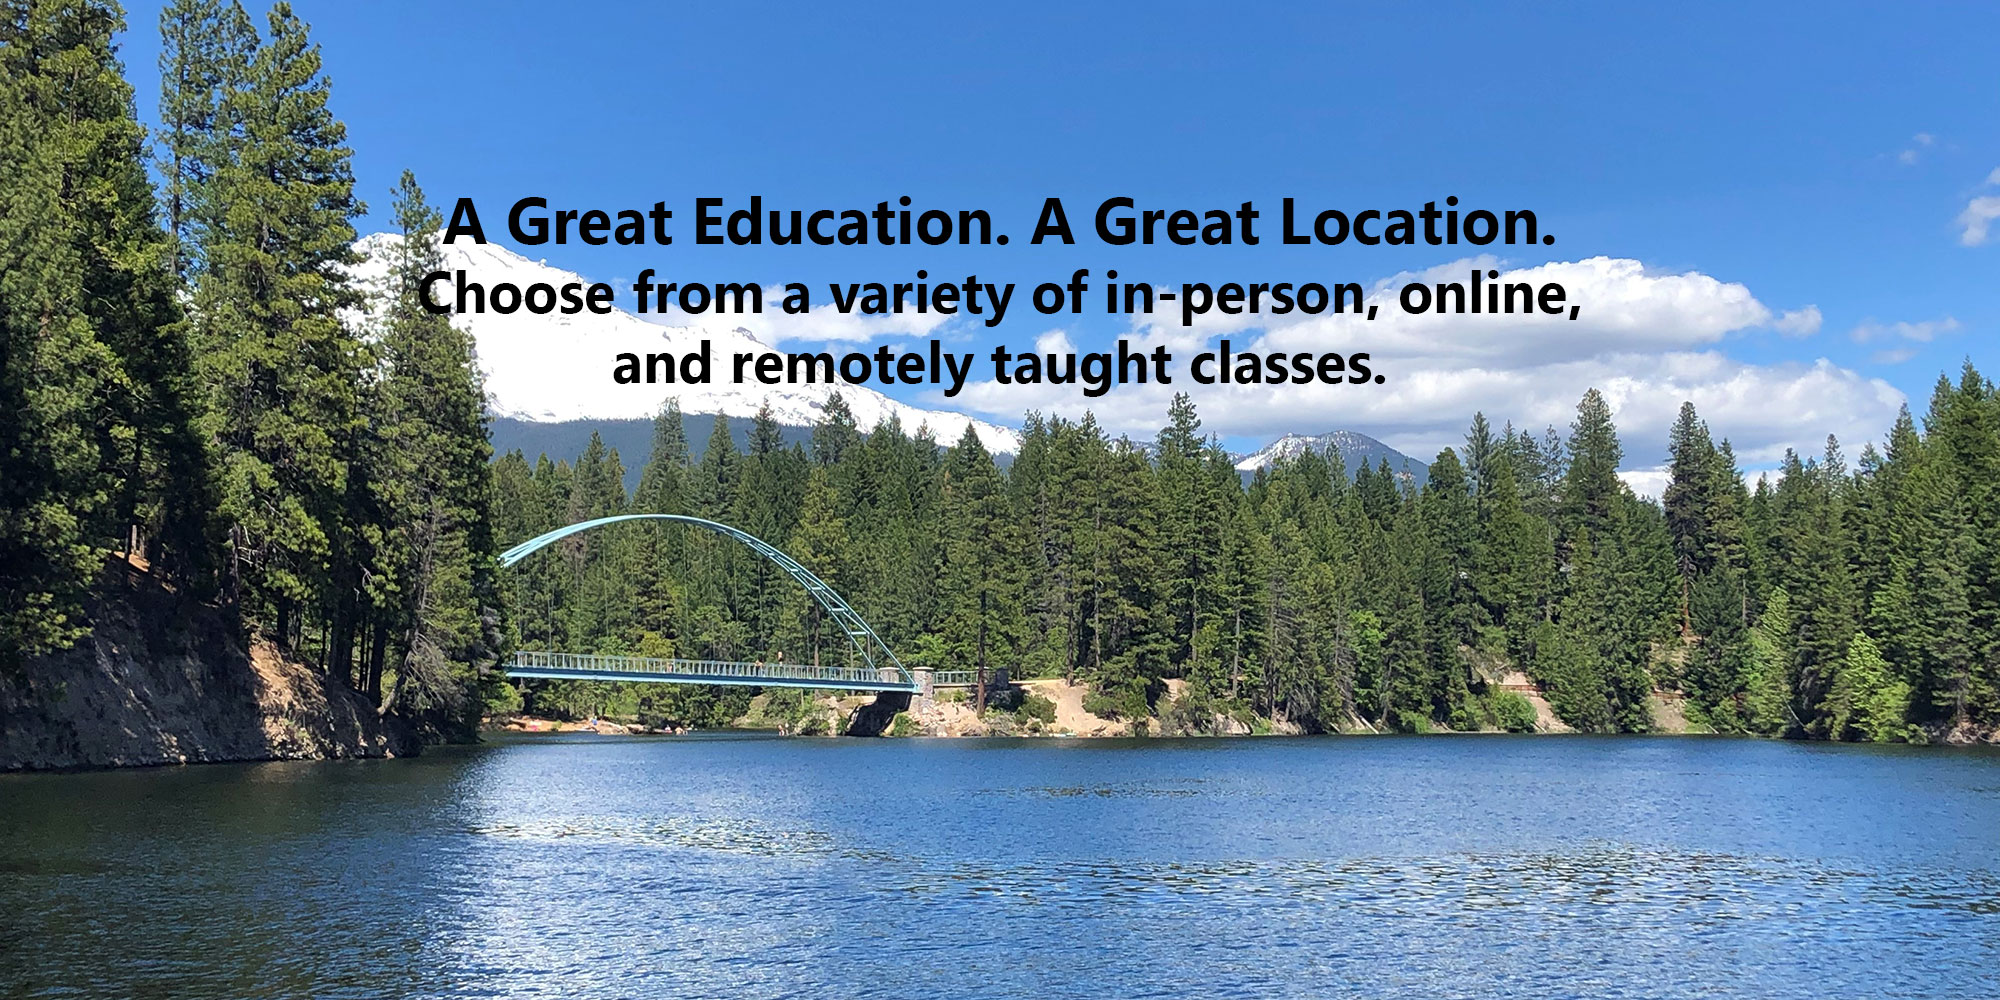 A Great Education. A Great Location. Choose from a variety of in-person, online, and remotely taught classes.